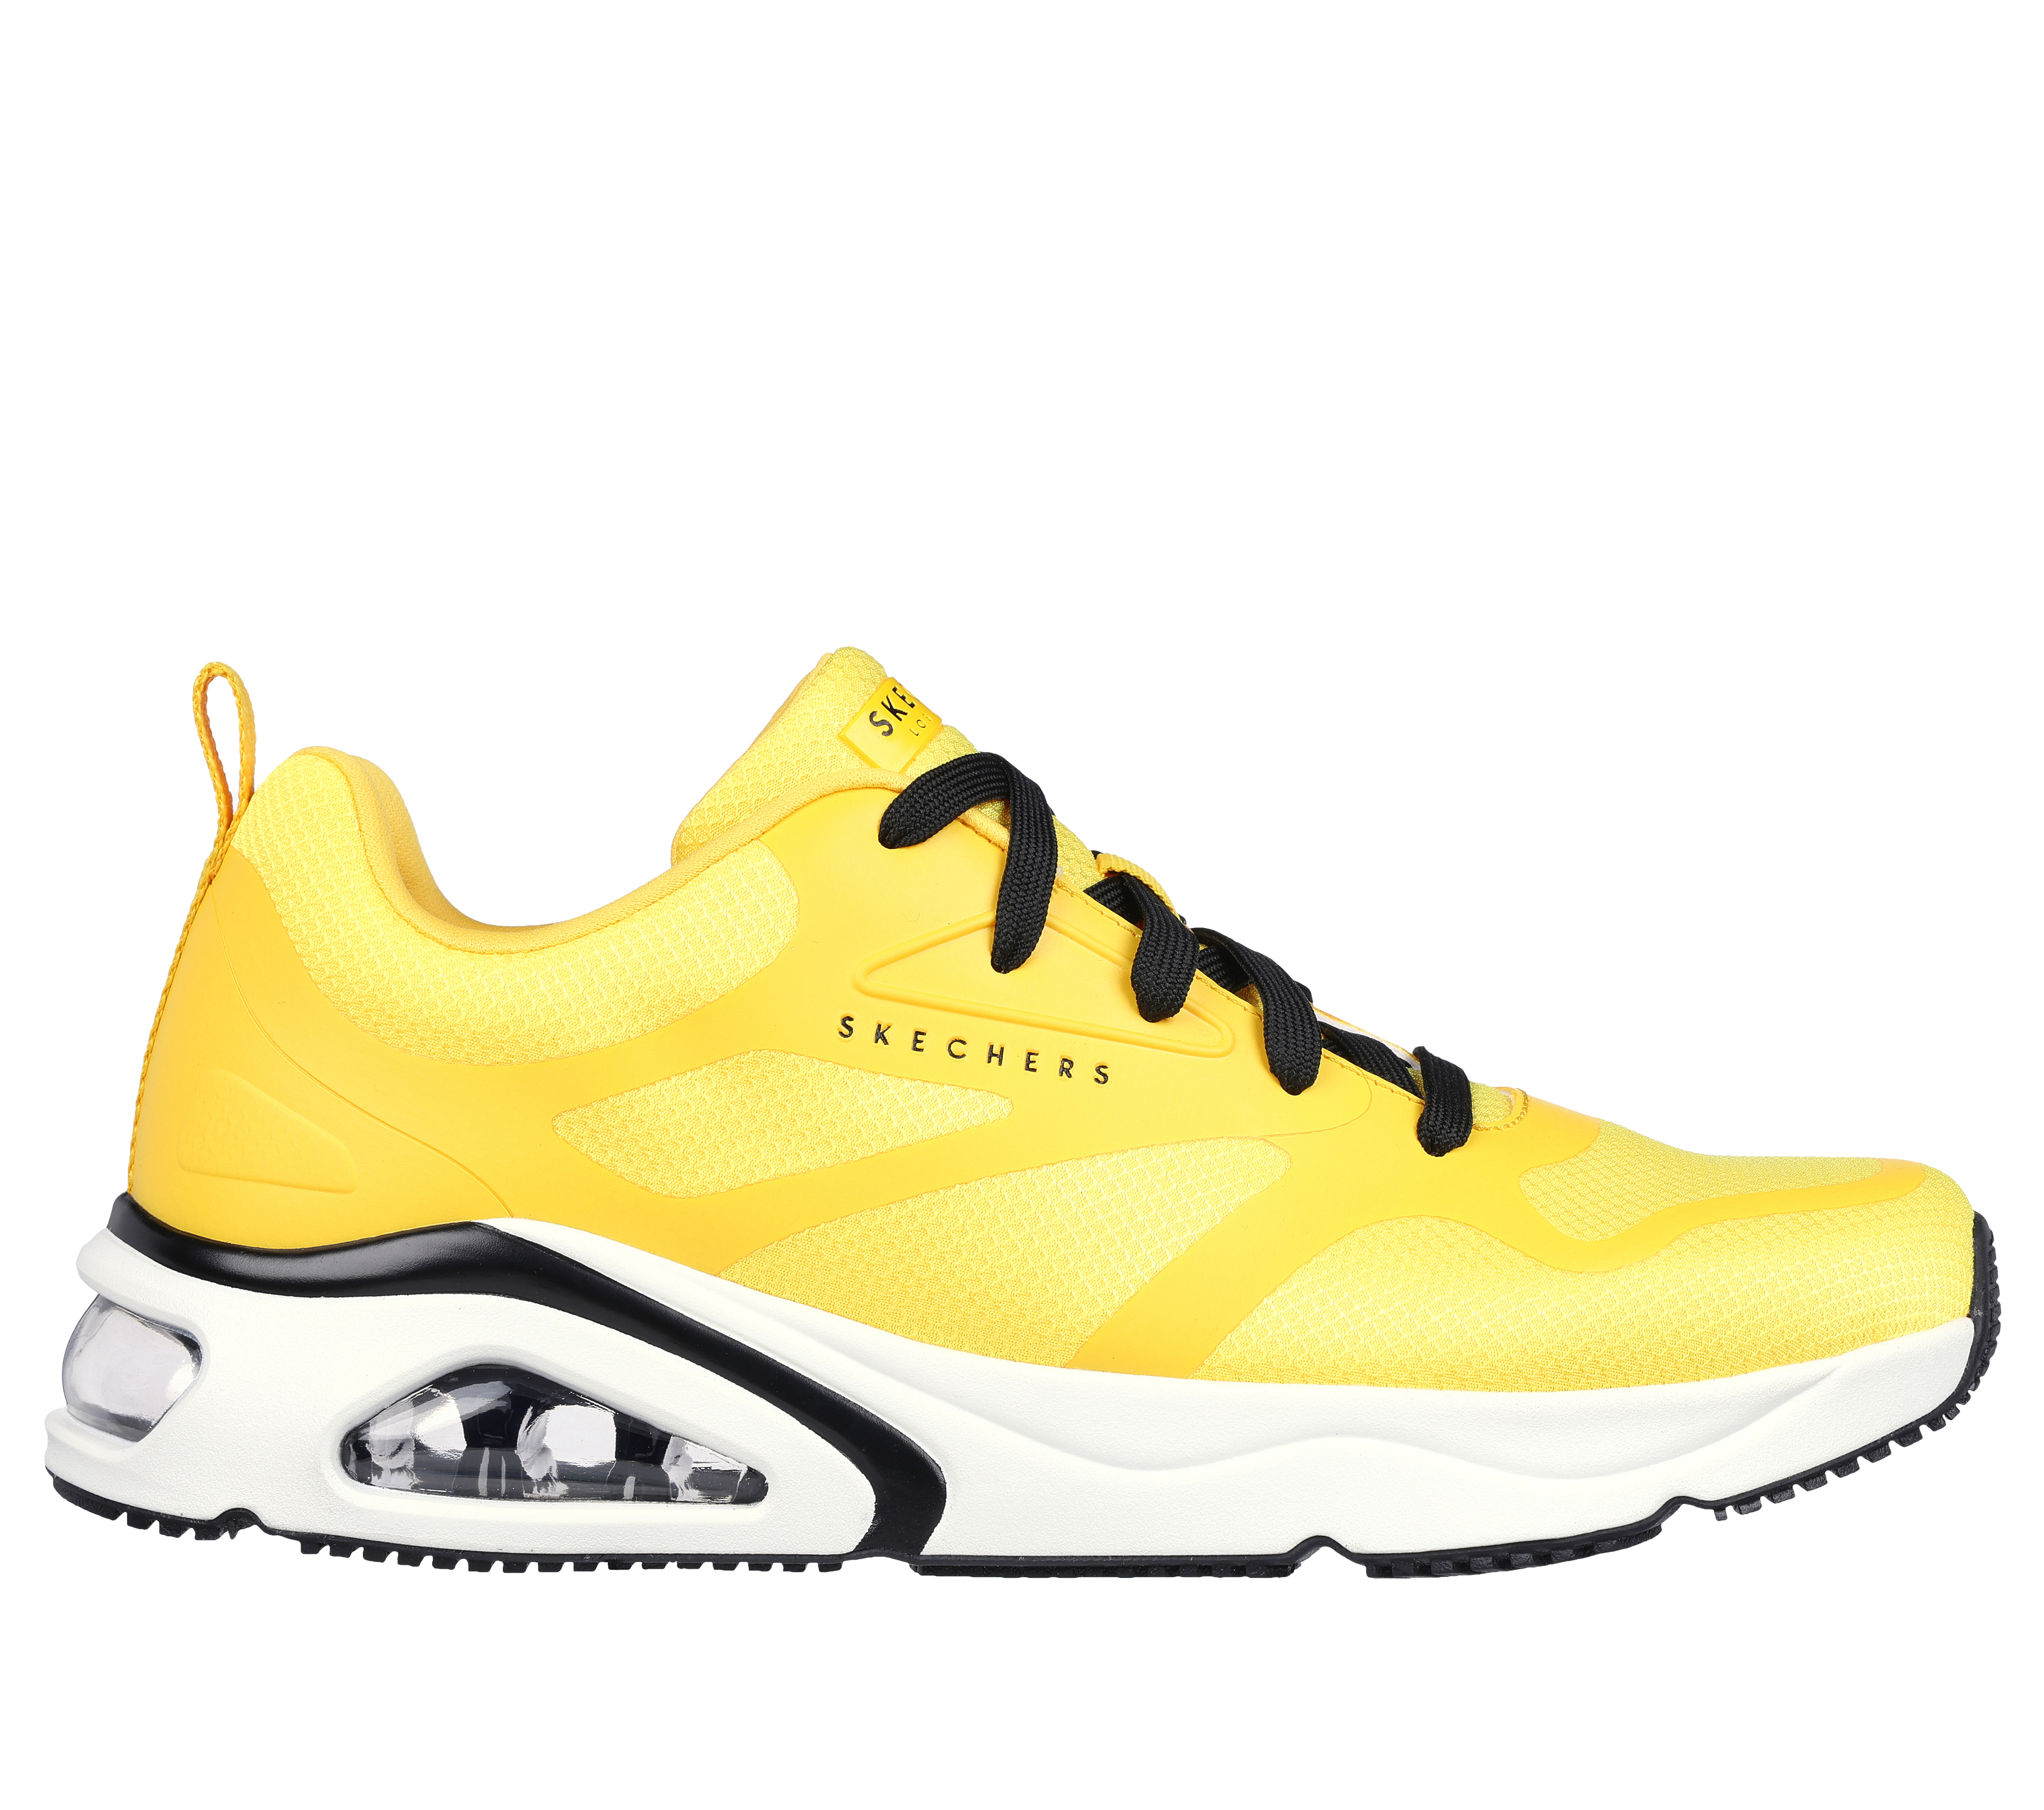 and yellow sneakers